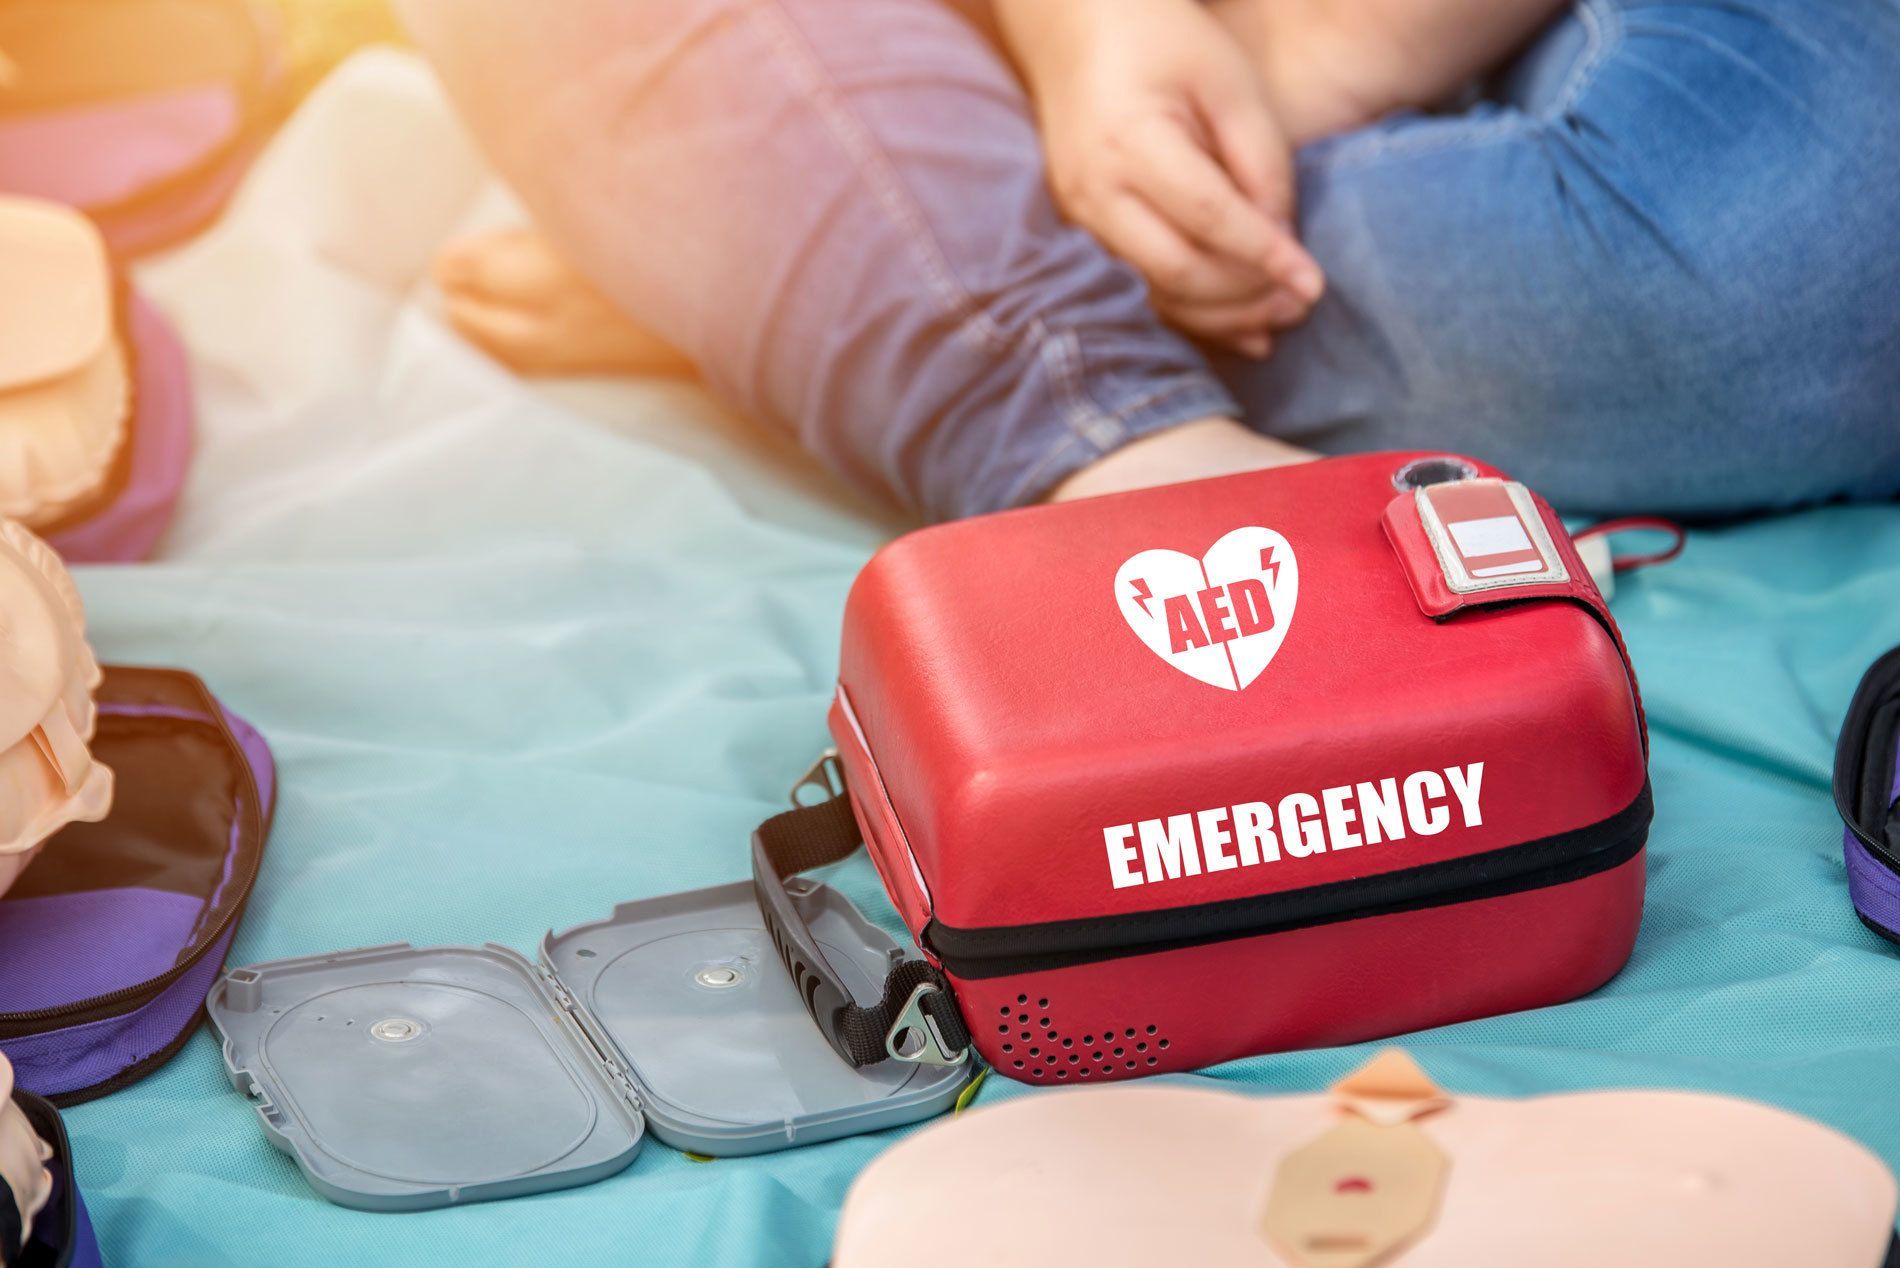 5 Shocking AED and Defibrillator Facts